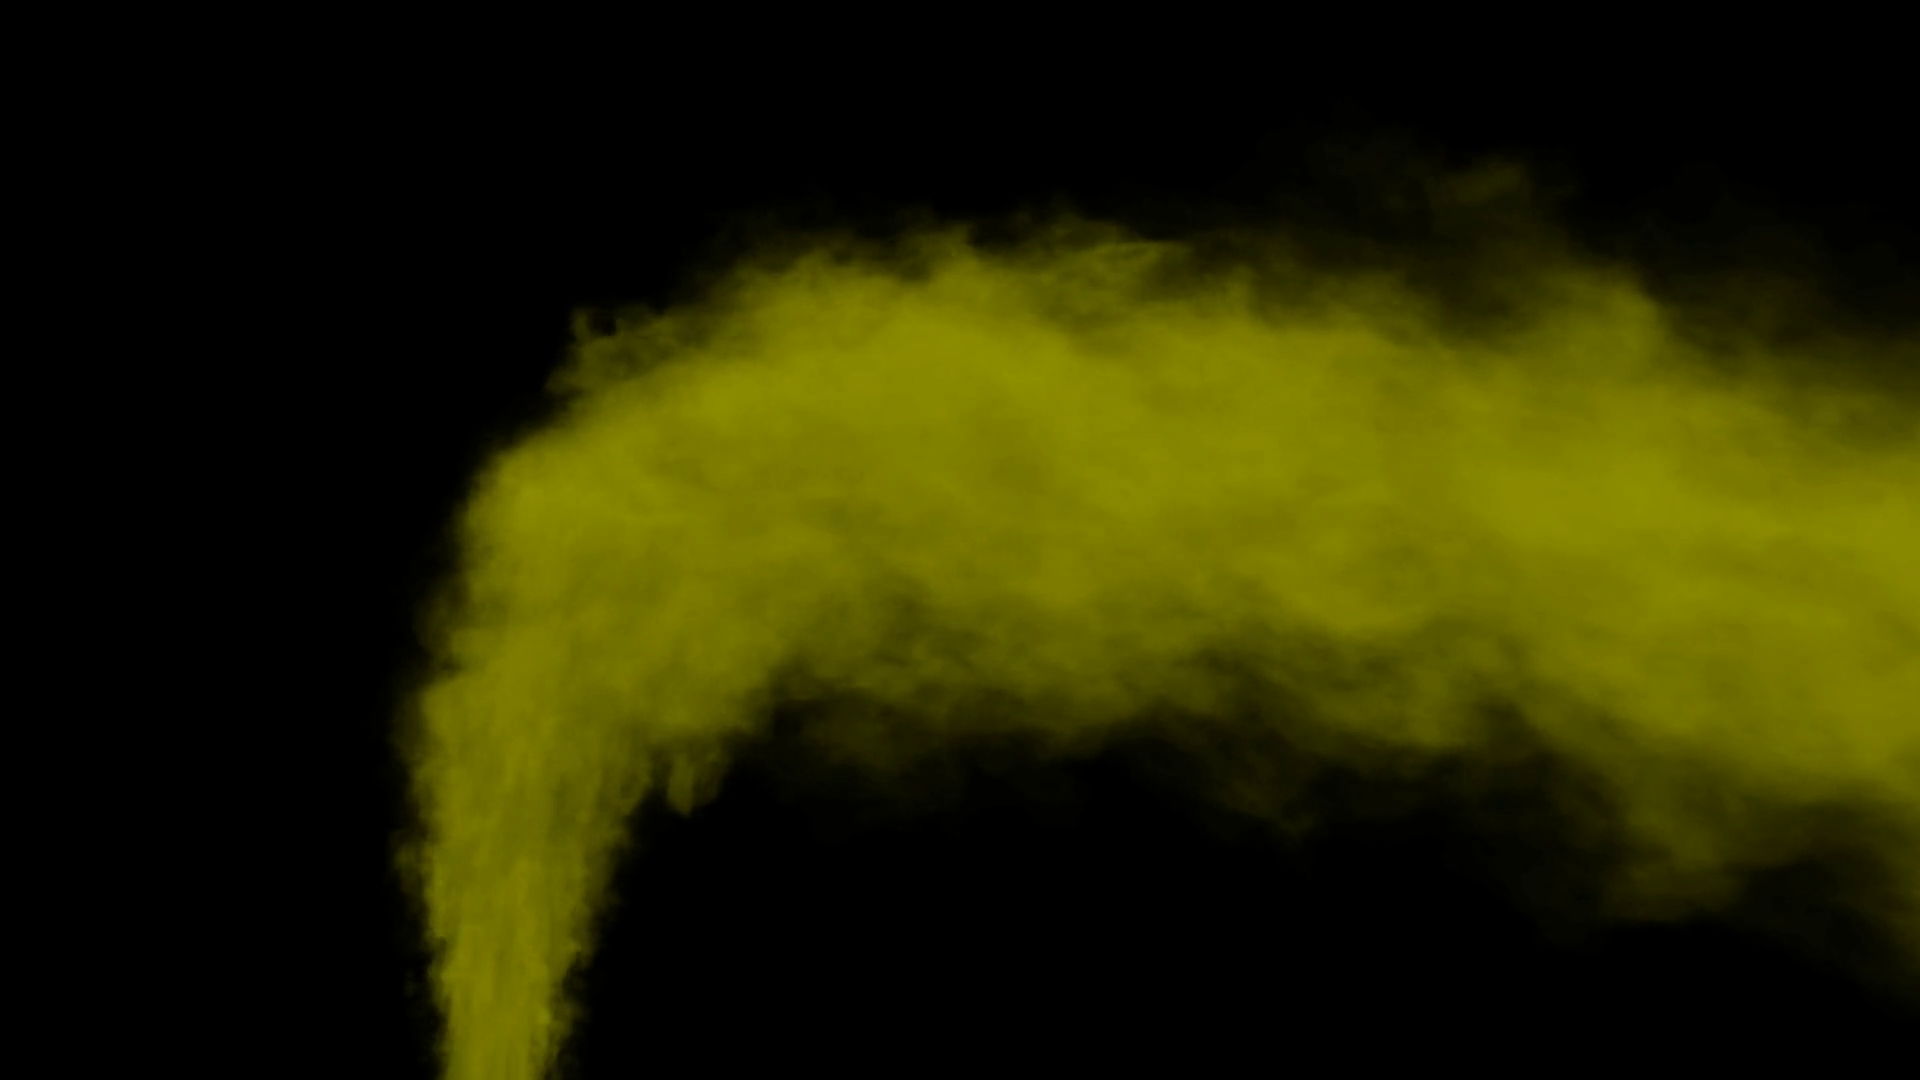 Animated stream of yellow smoke or toxic gas drifting to the right ...